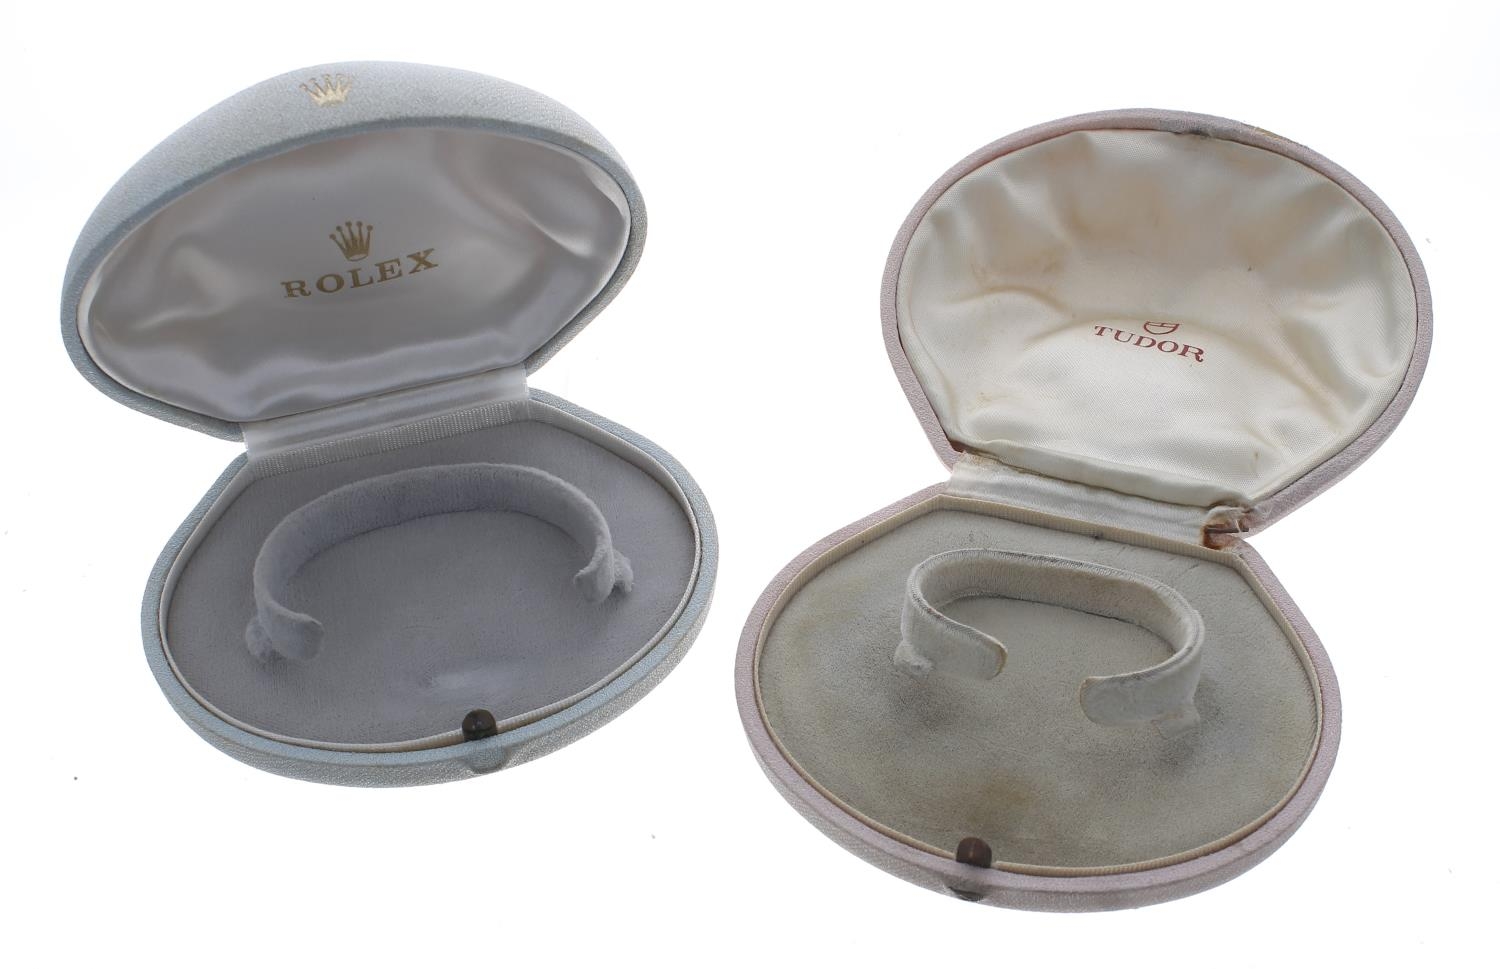 Rolex 'clamshell' lady's wristwatch box; together with a Tudor 'clamshell' lady's wristwatch box (2)